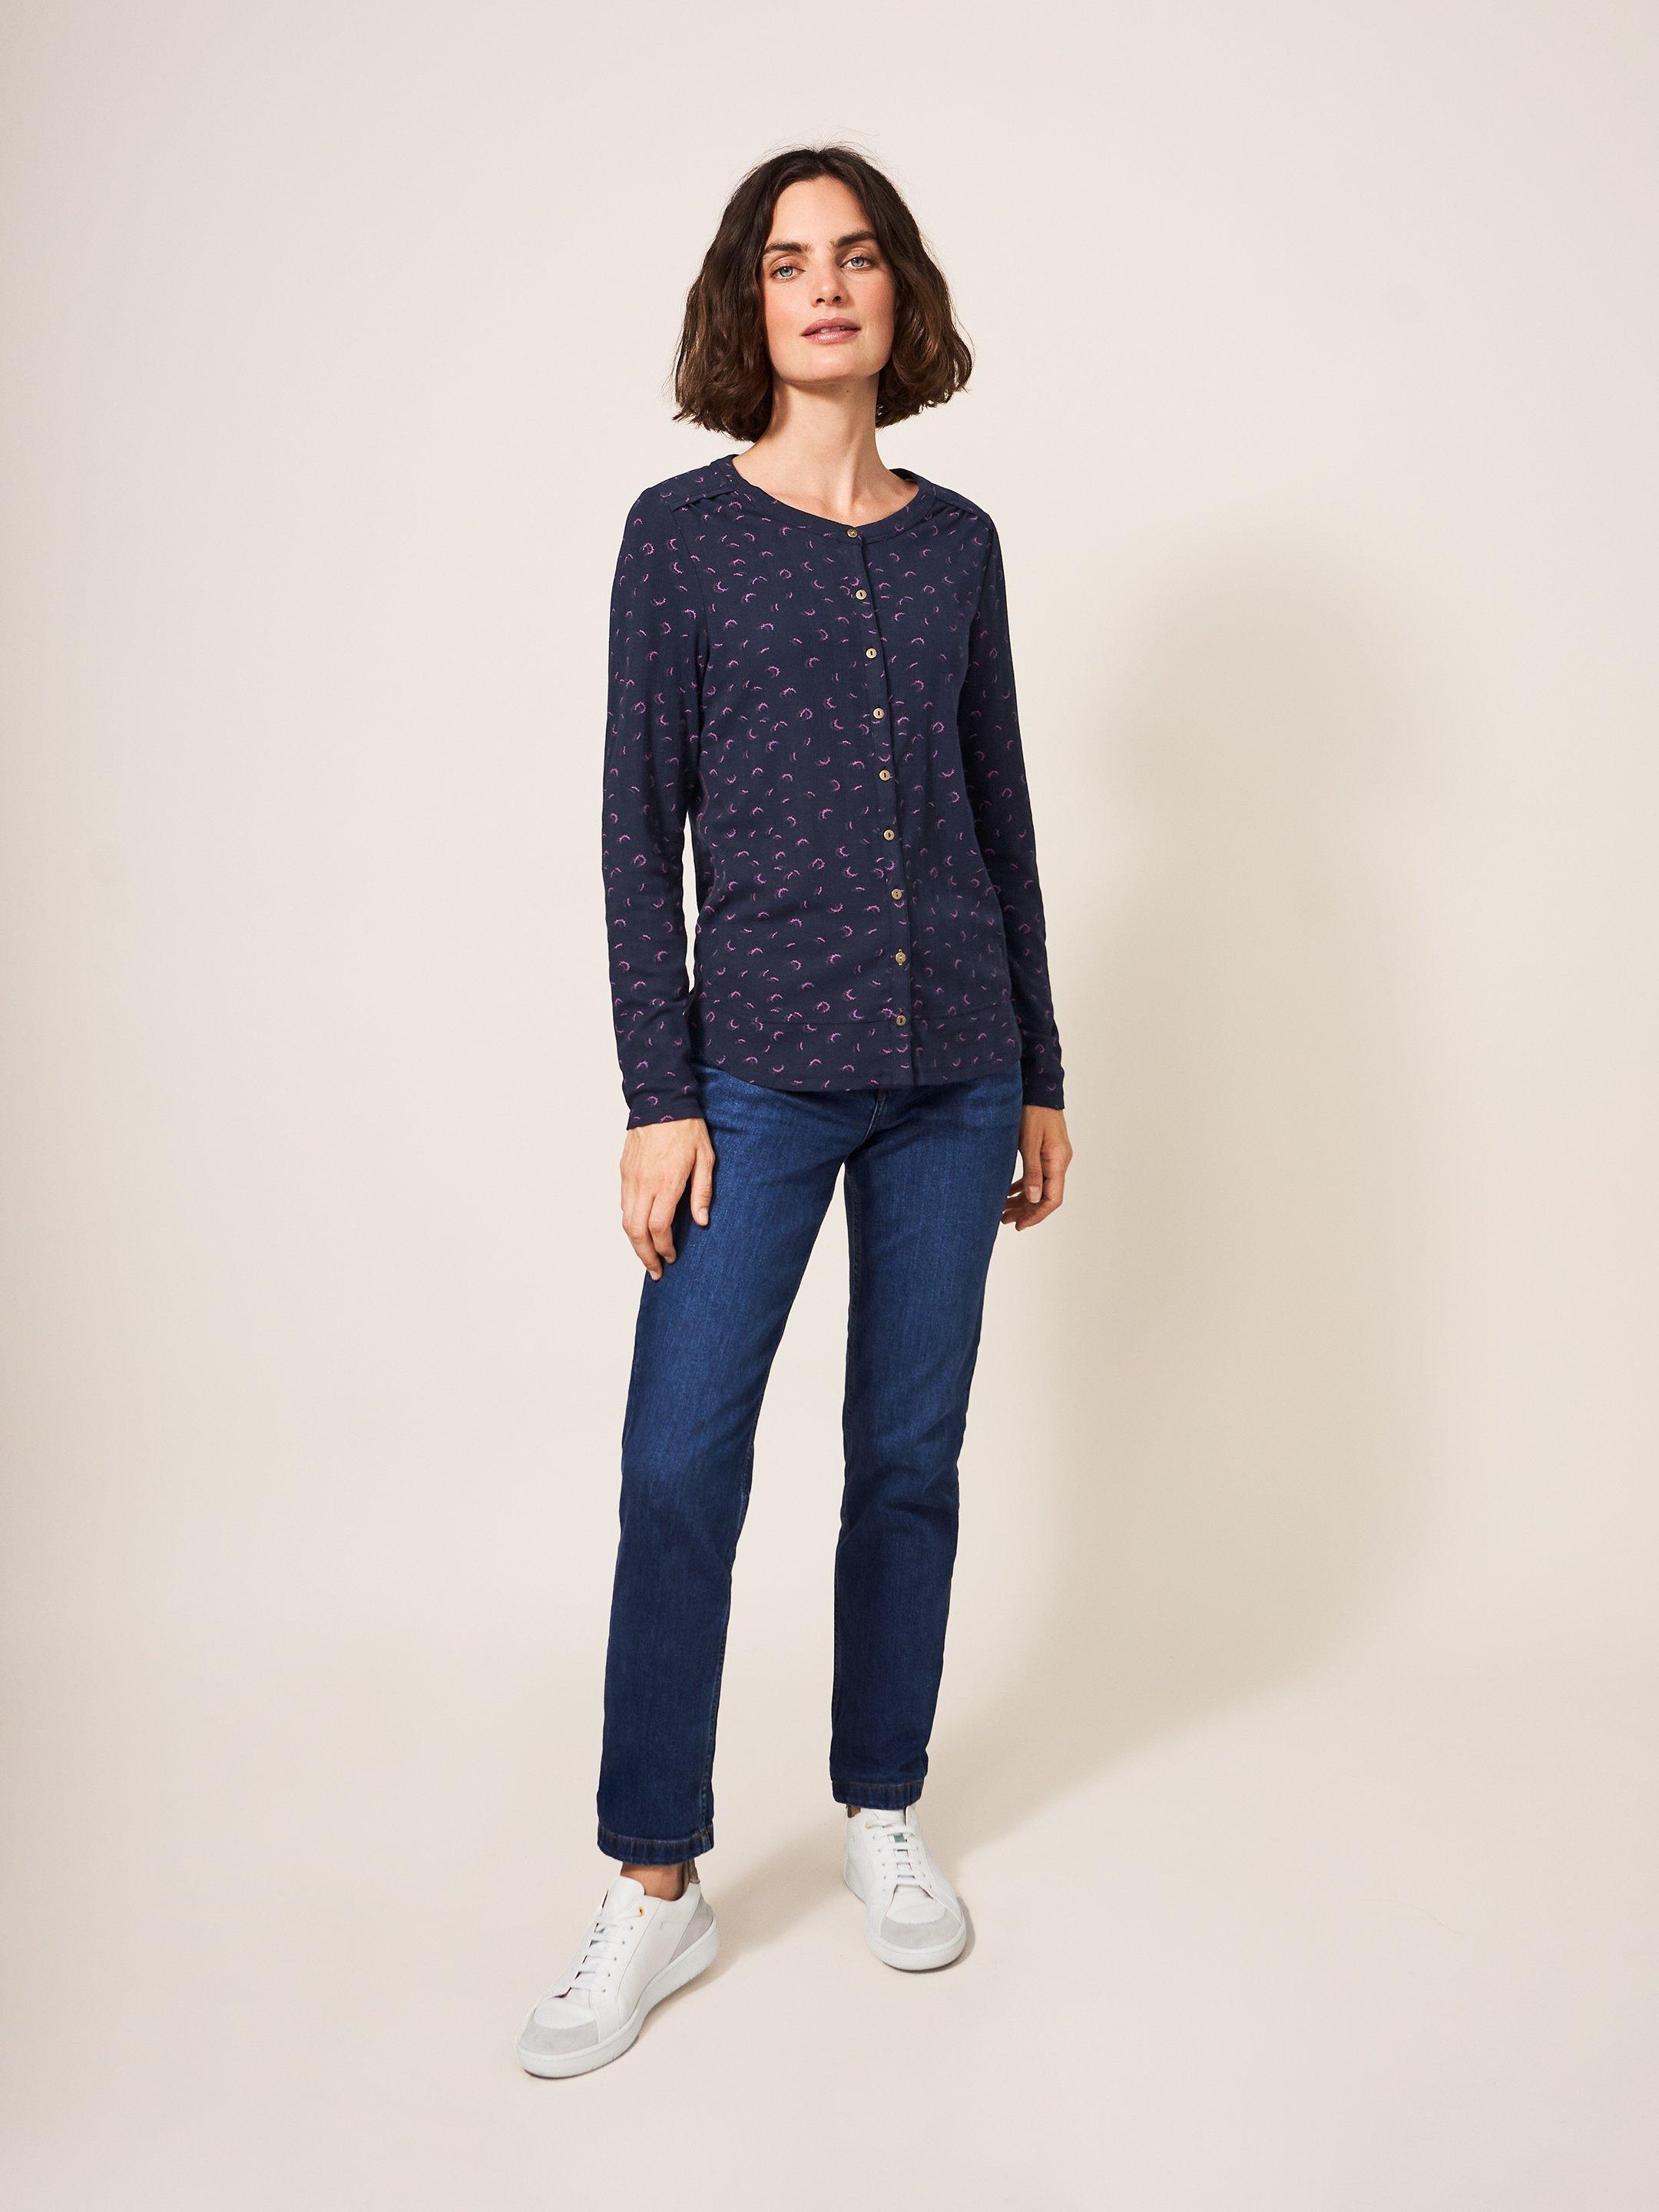 Bobbi Button Jersey Top in NAVY MULTI - MODEL FRONT